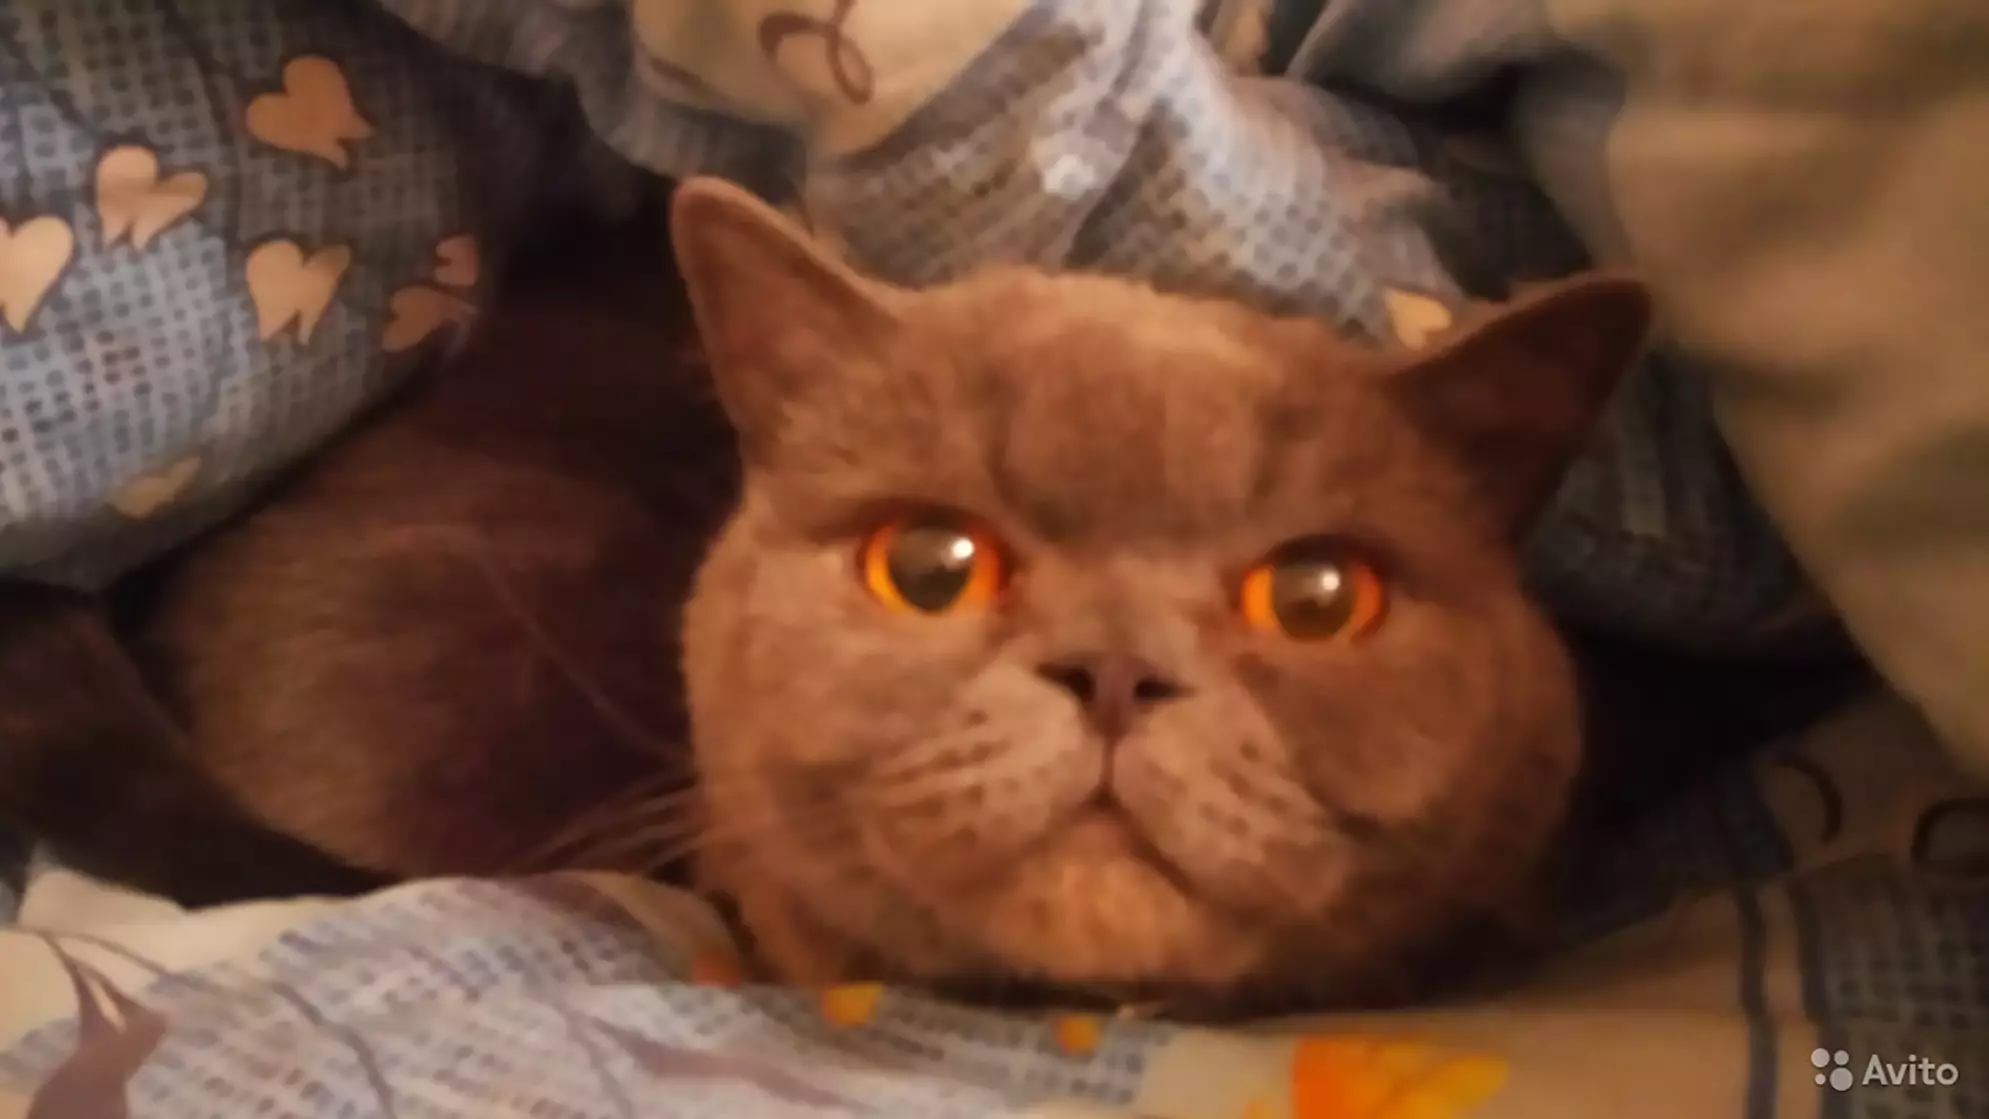 Hangover-Curing Cat On Sale For £185,000